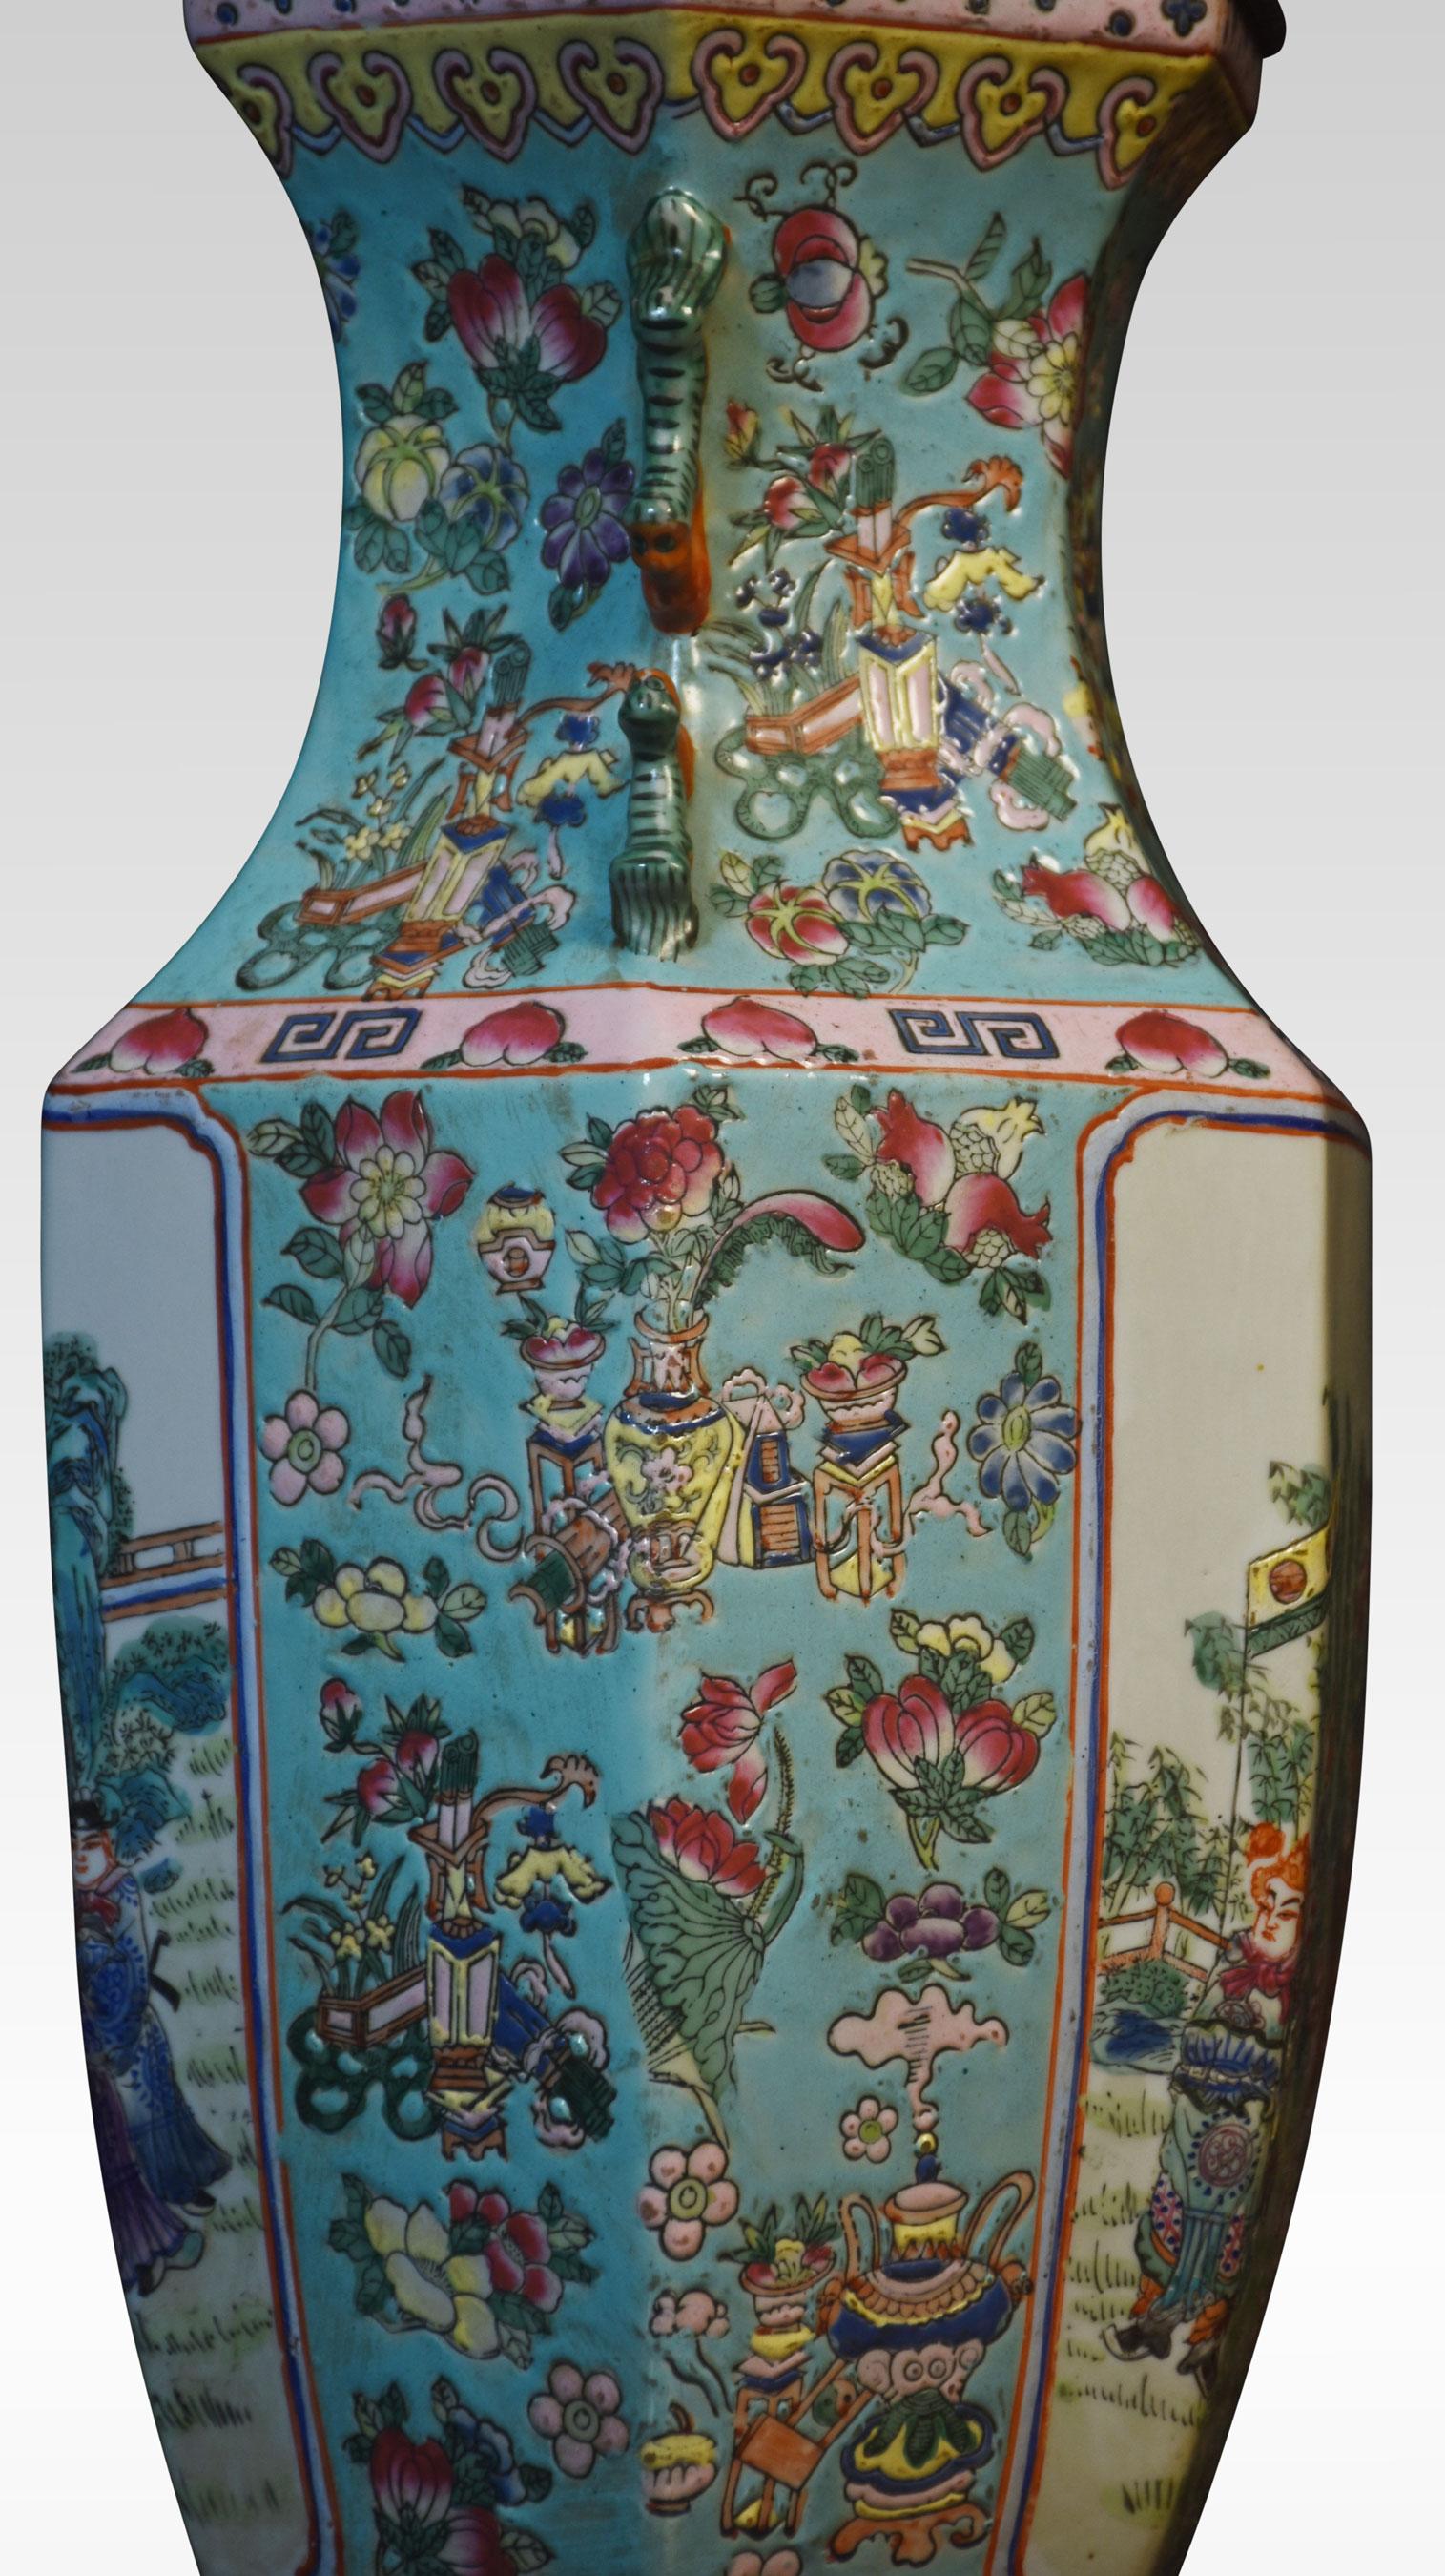 Chinese famille rose vase lamp with French gilt-brass mounts, the vase of hexagonal form with confronting Buddhist lion handles, the two panels depicting court scenes.
Dimensions
Height 31.5 Inches
Width 8 Inches
Depth 8 Inches